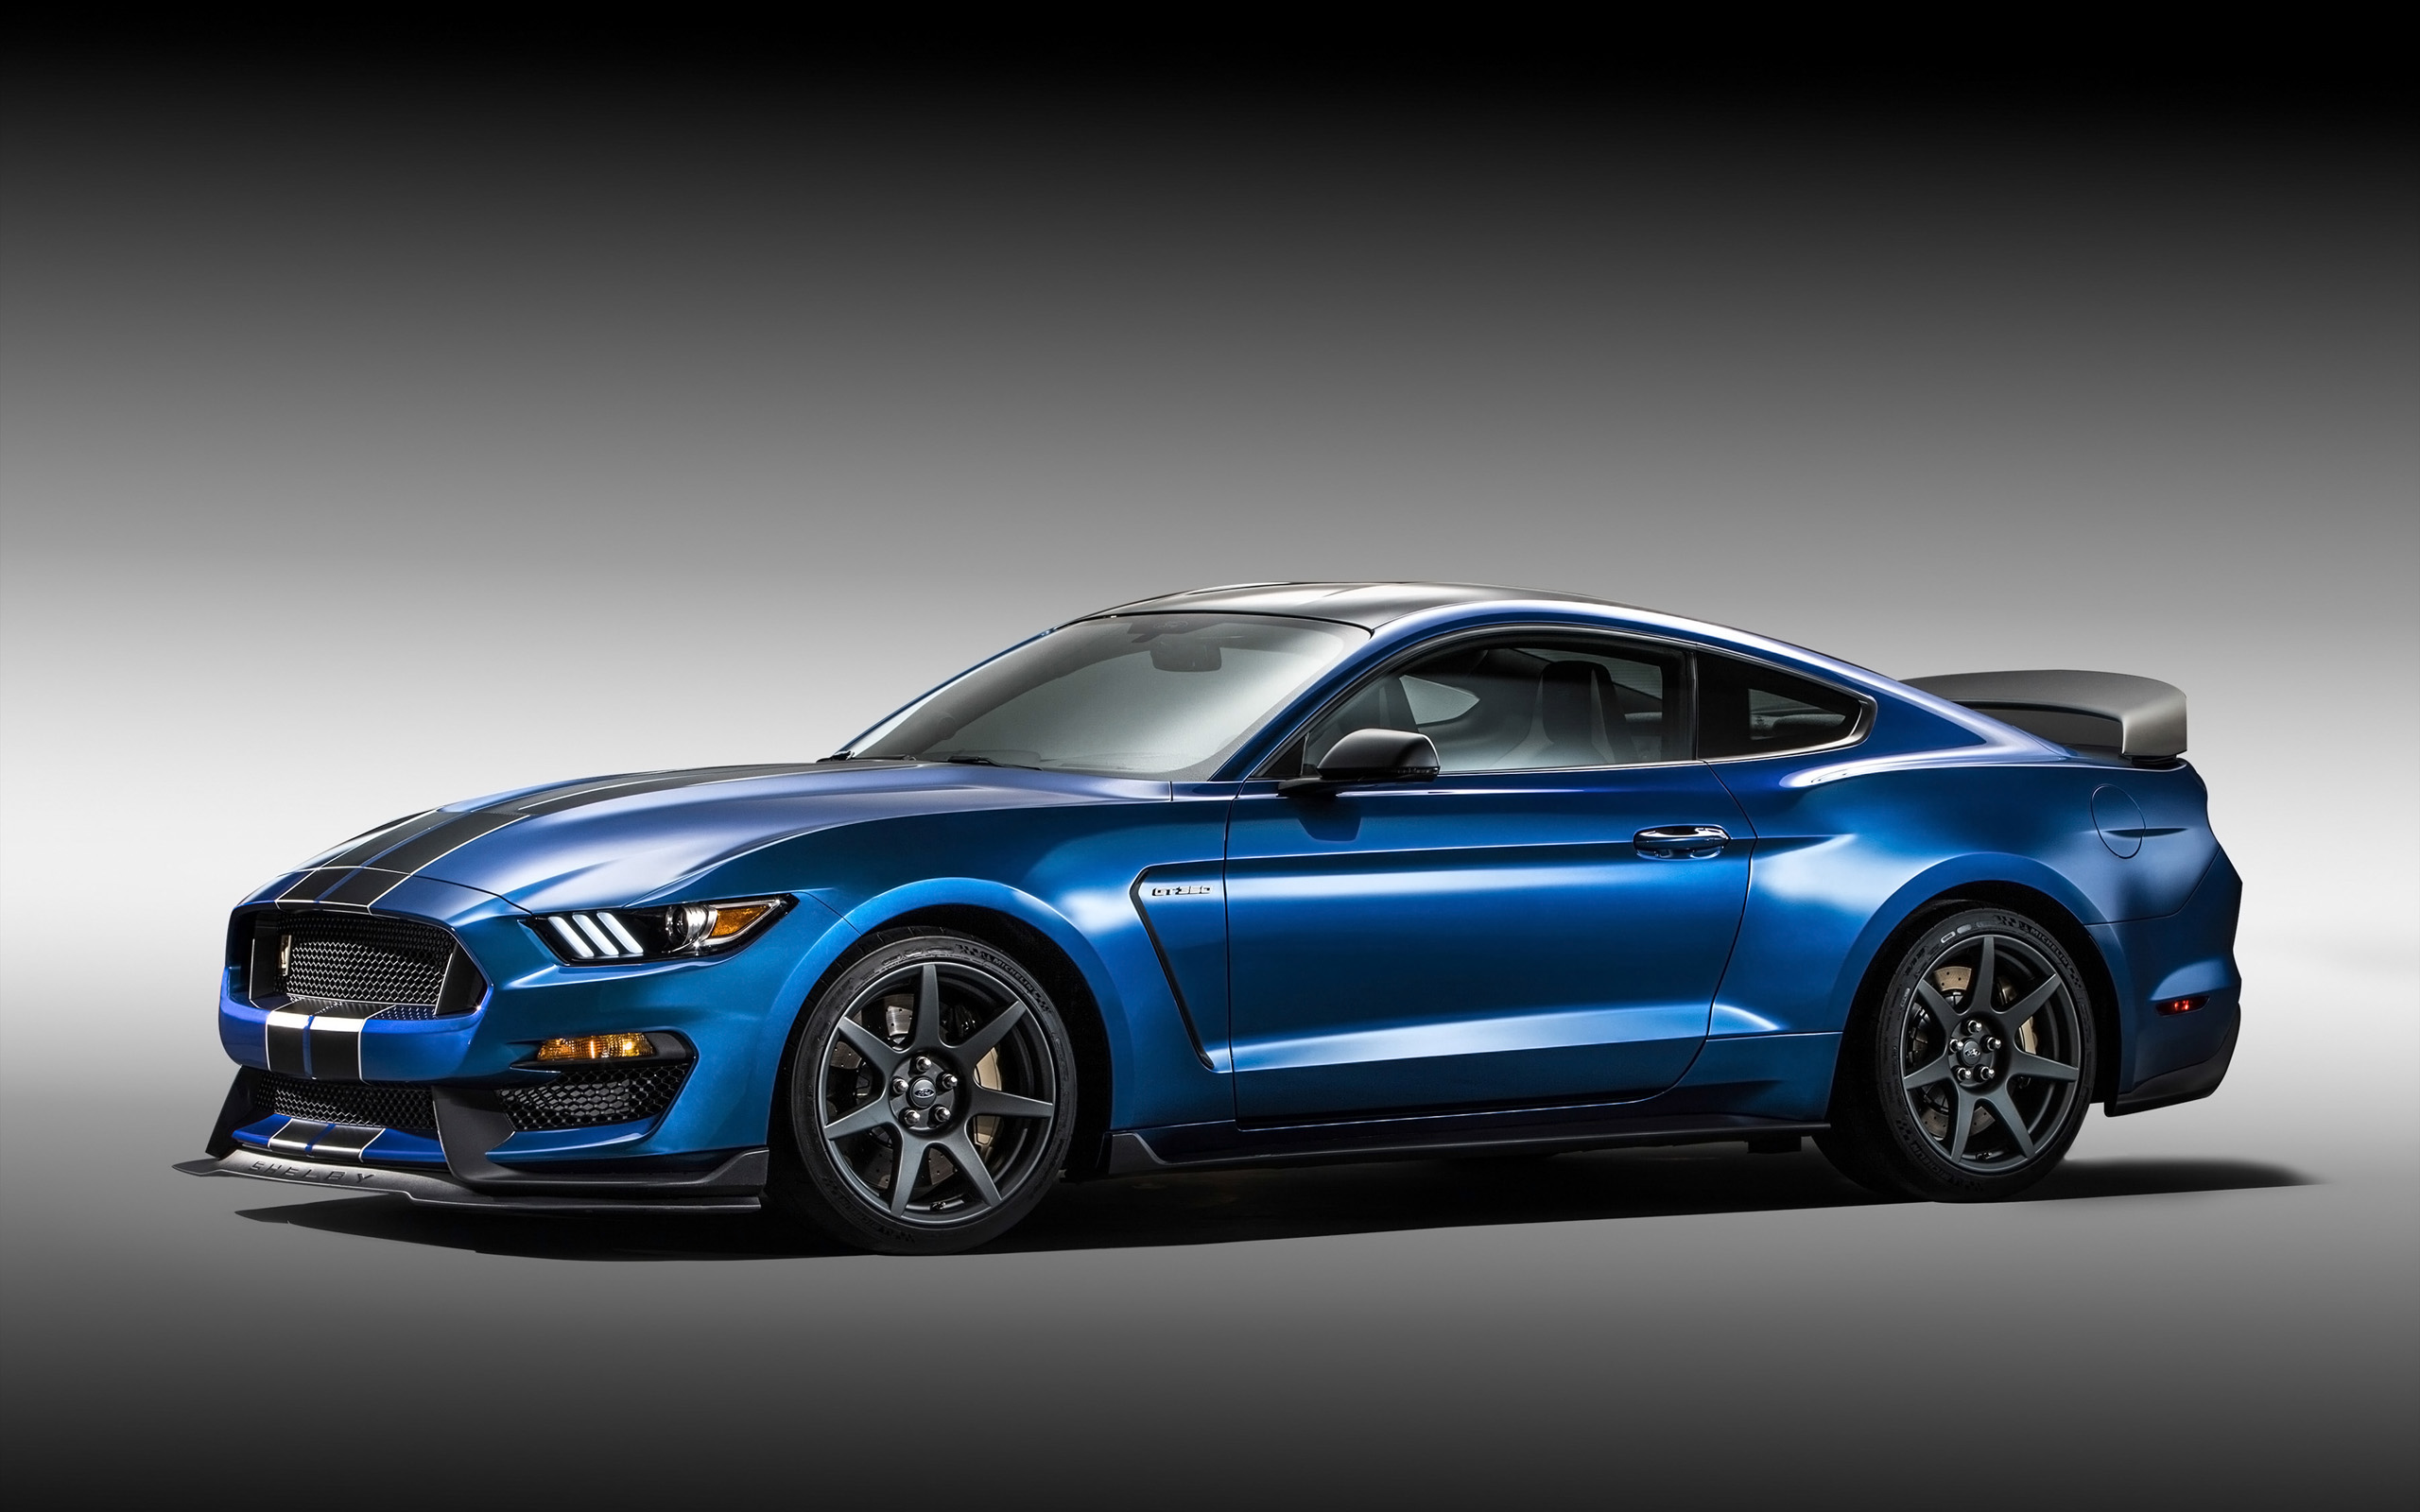 2016 Ford Shelby Gt350r Mustangrelated Car Wallpapers Wallpaper Cars Wallpaper Better